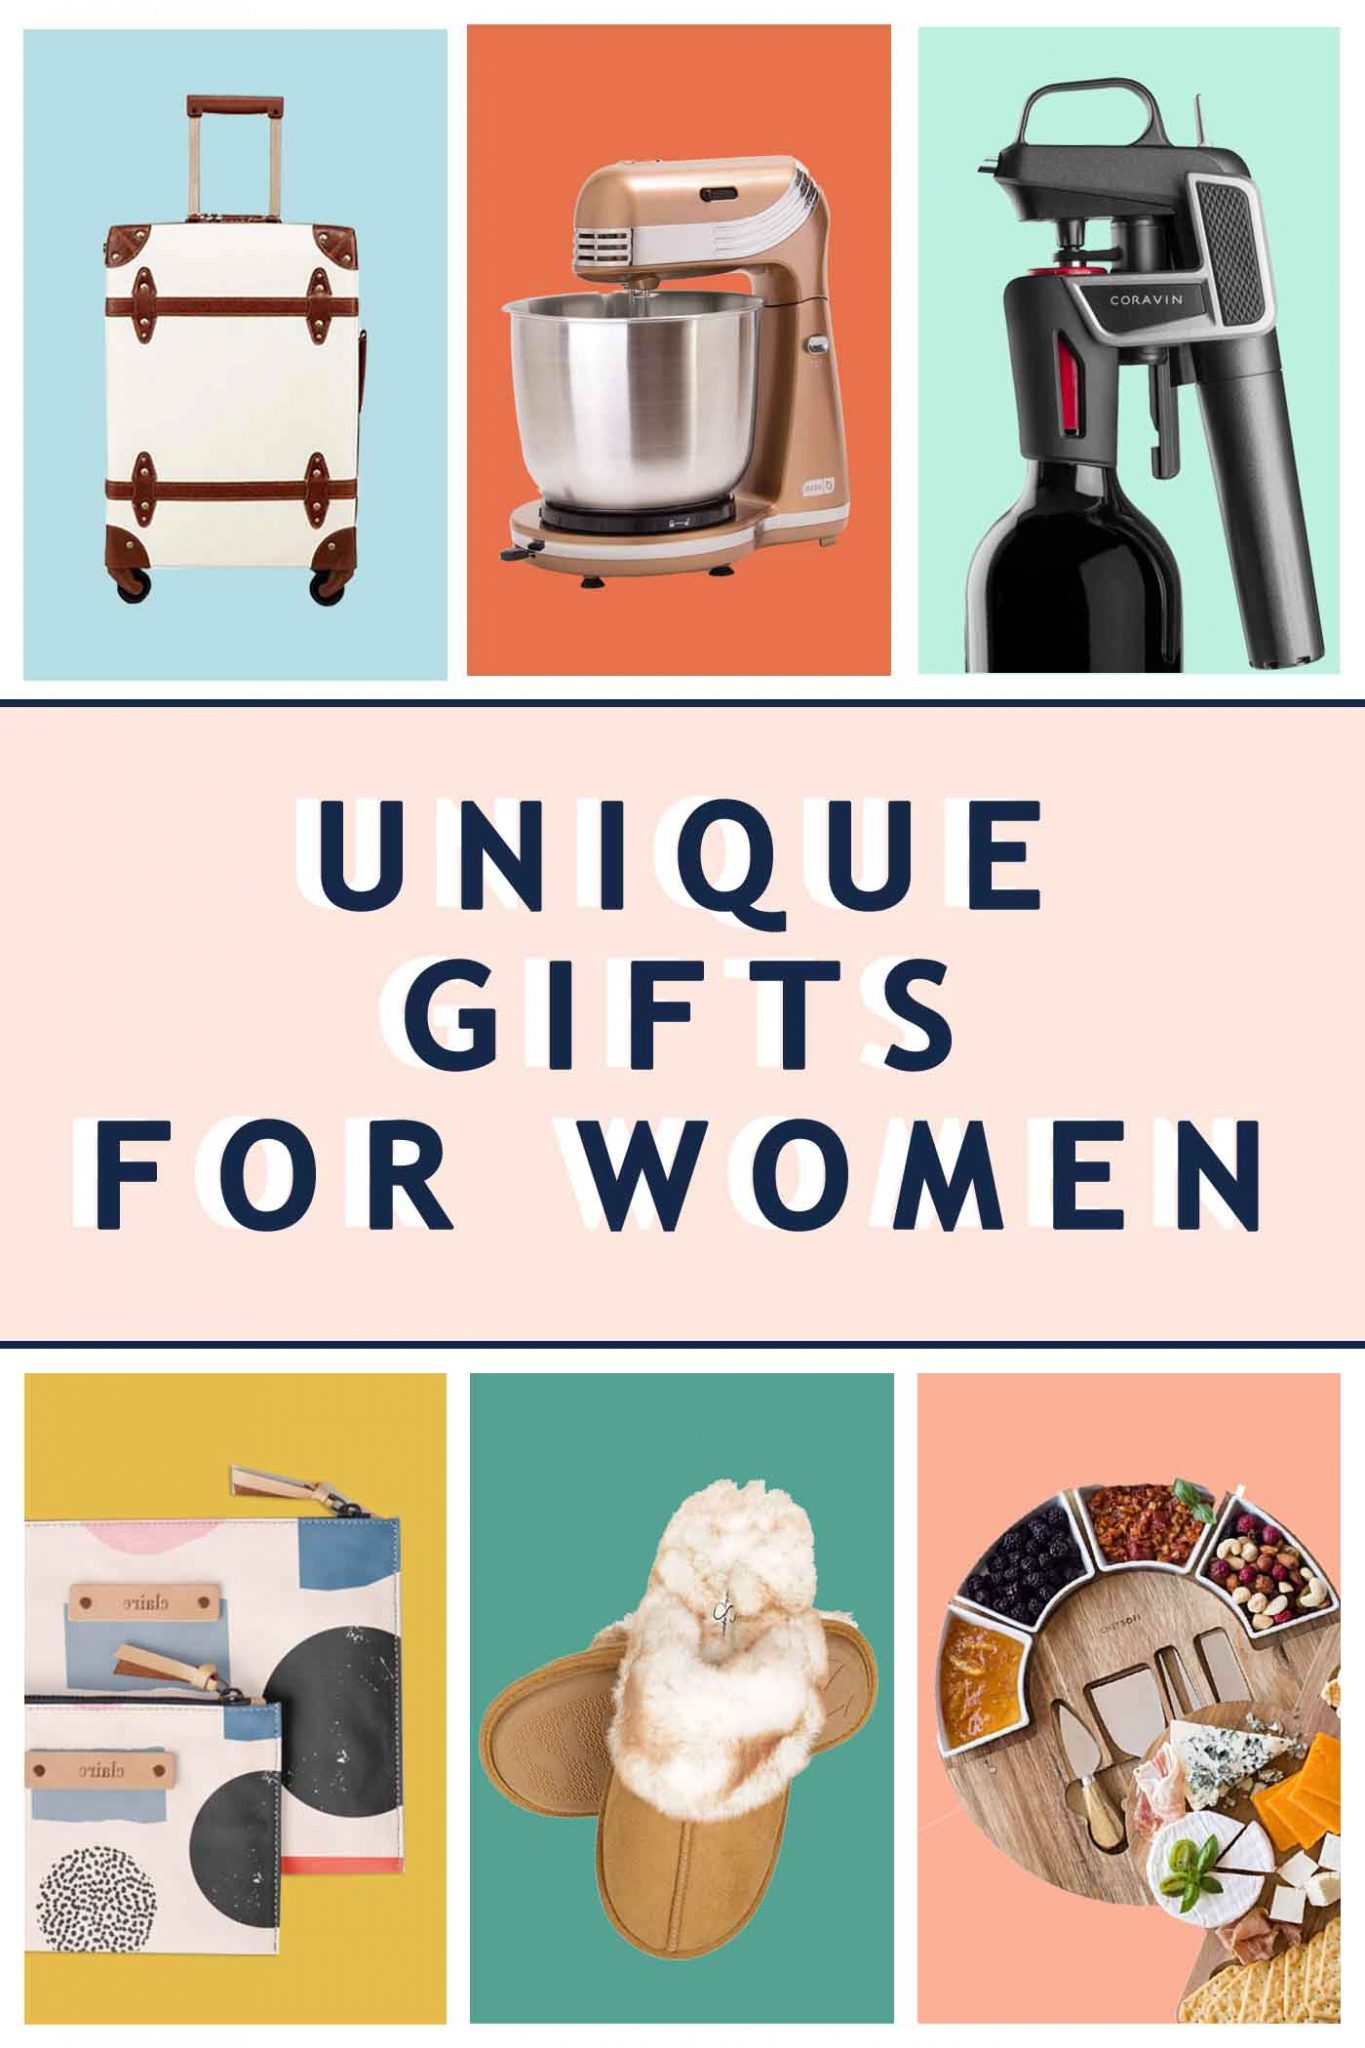 42 Unique Gifts For Women For Any Occasion — Sugar & Cloth